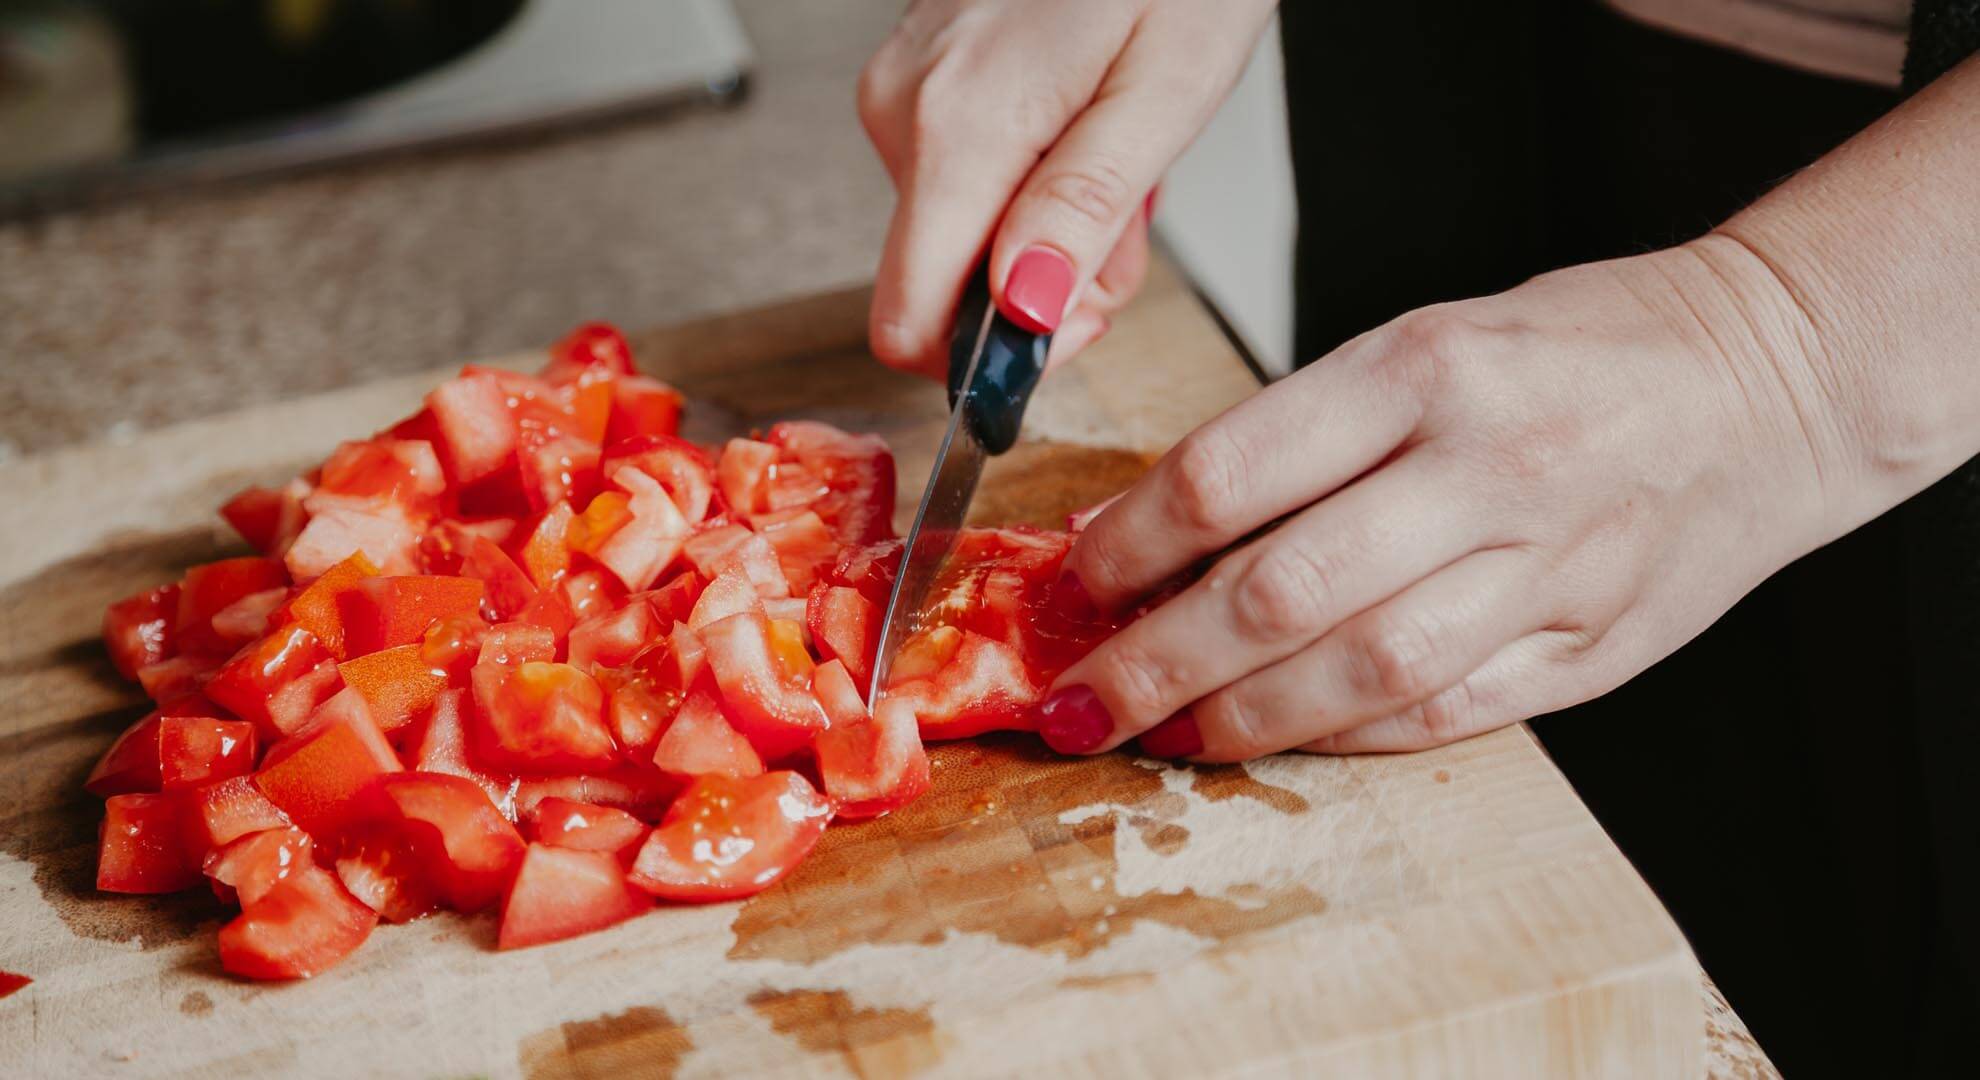 a person chopping up tomatoes on a board